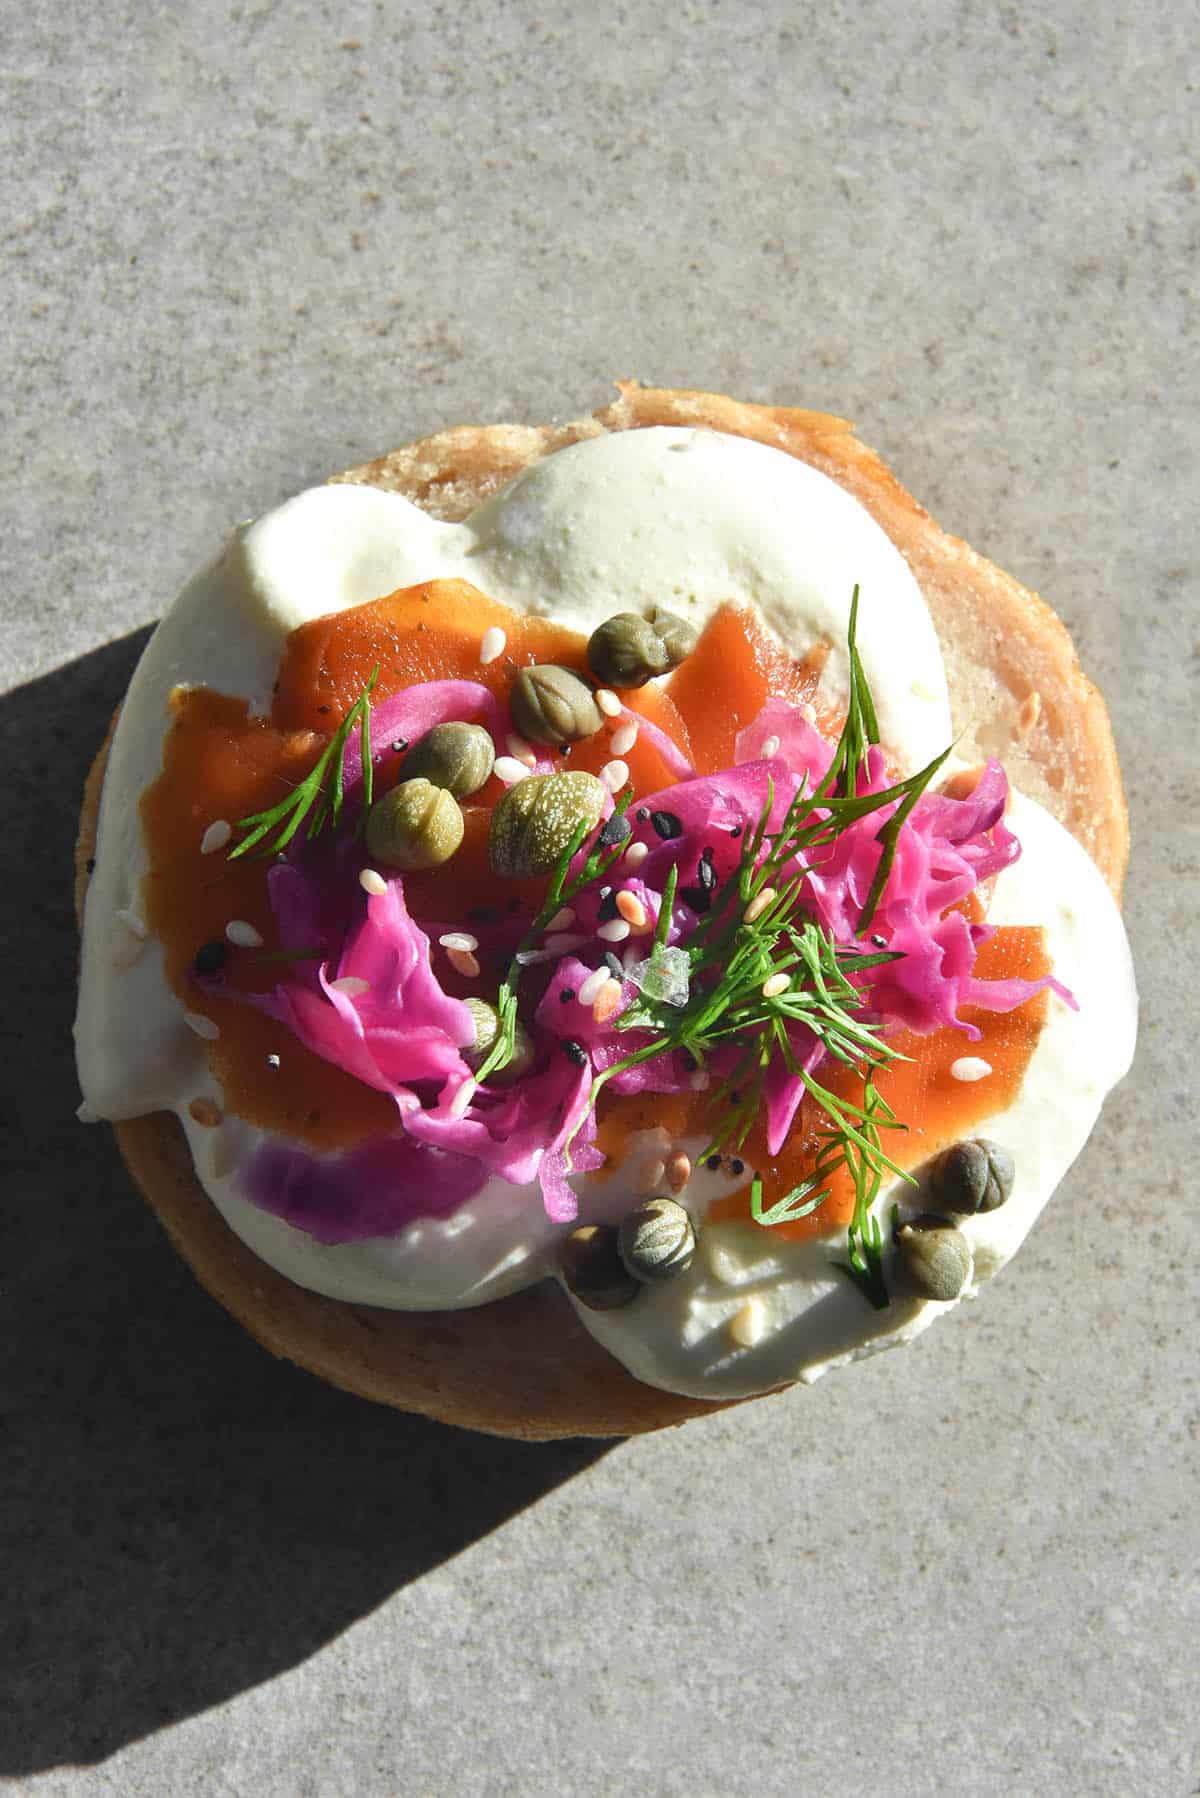 An aerial close up image of a gluten free bagel sliced and topped with lactose free mascarpone, FODMAP friendly everything bagel seasoning, FODMAP friendly 'pickled red onion', vegetarian lox, capers and dill. The bagel slice sits in bright sunlight and it's shadow casts over the bottom right of the image